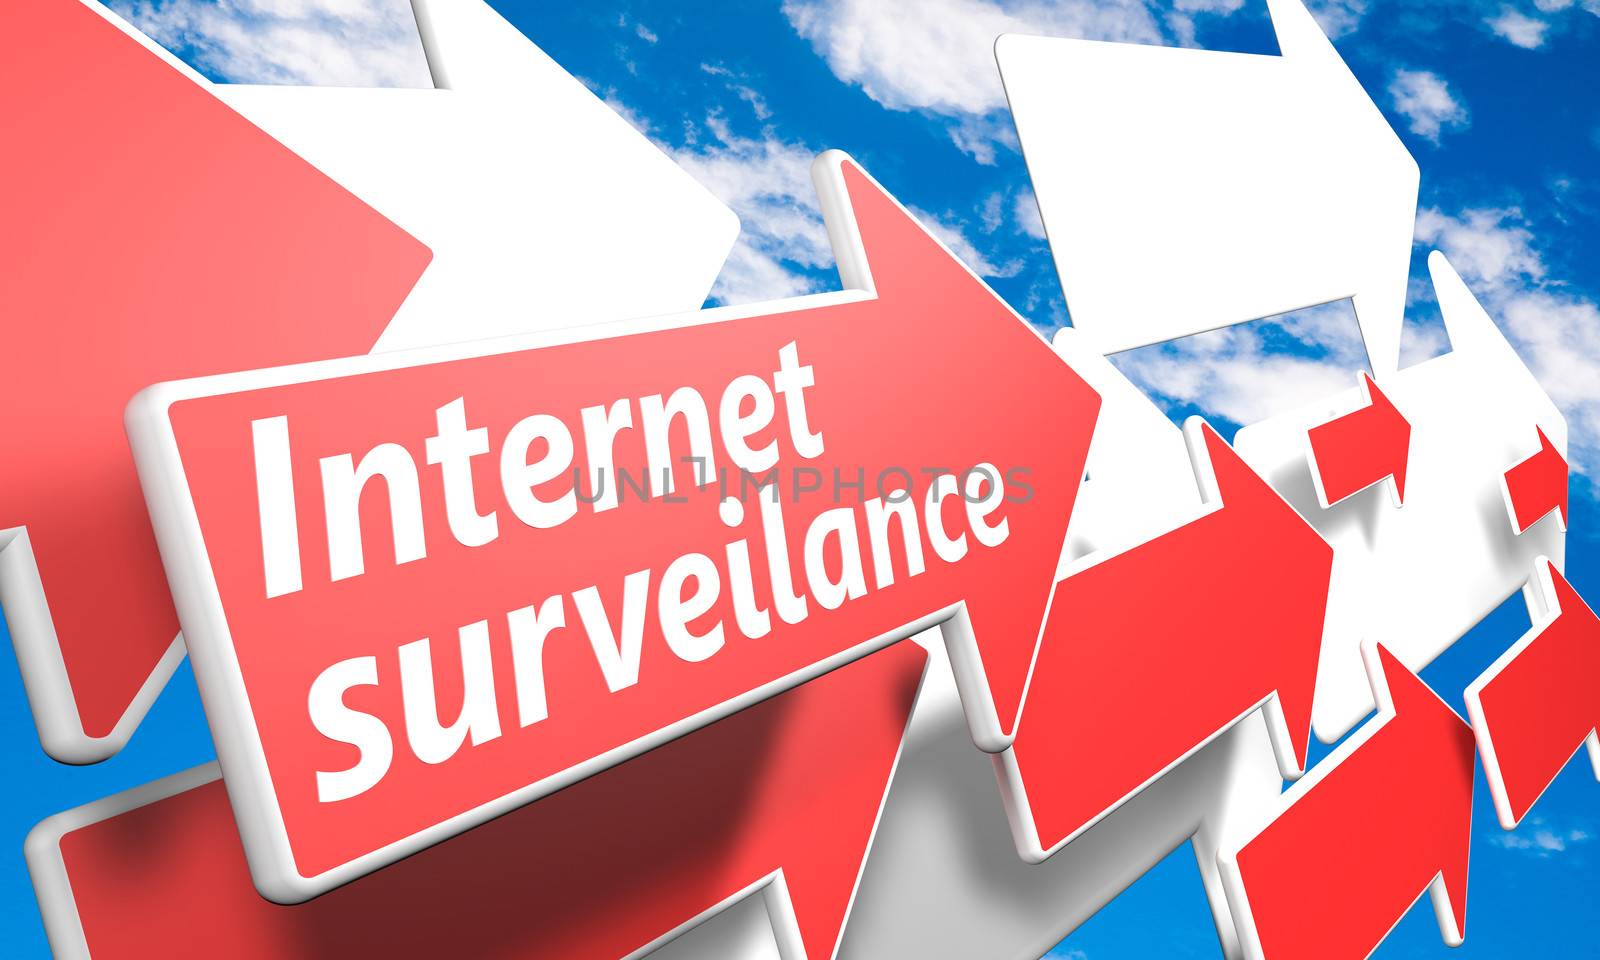 Internet surveillance 3d render concept with red and white arrows flying in a blue sky with clouds